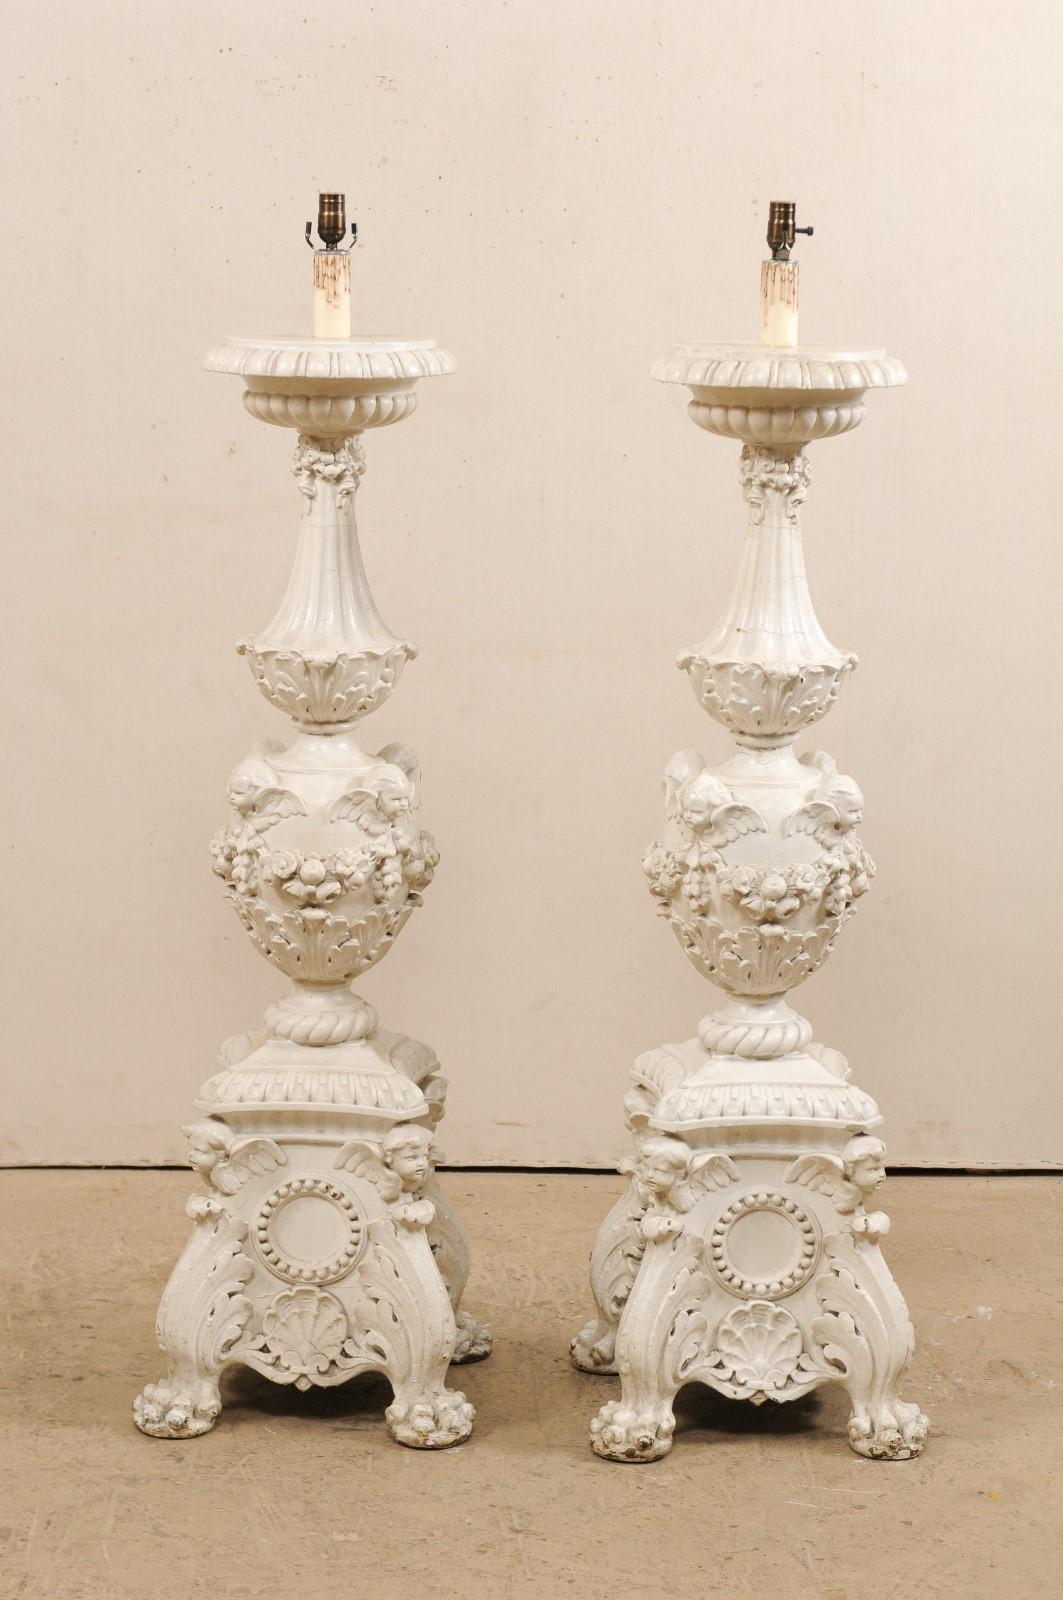 Carved Italian Candlestick Floor Lamps, 19th Century